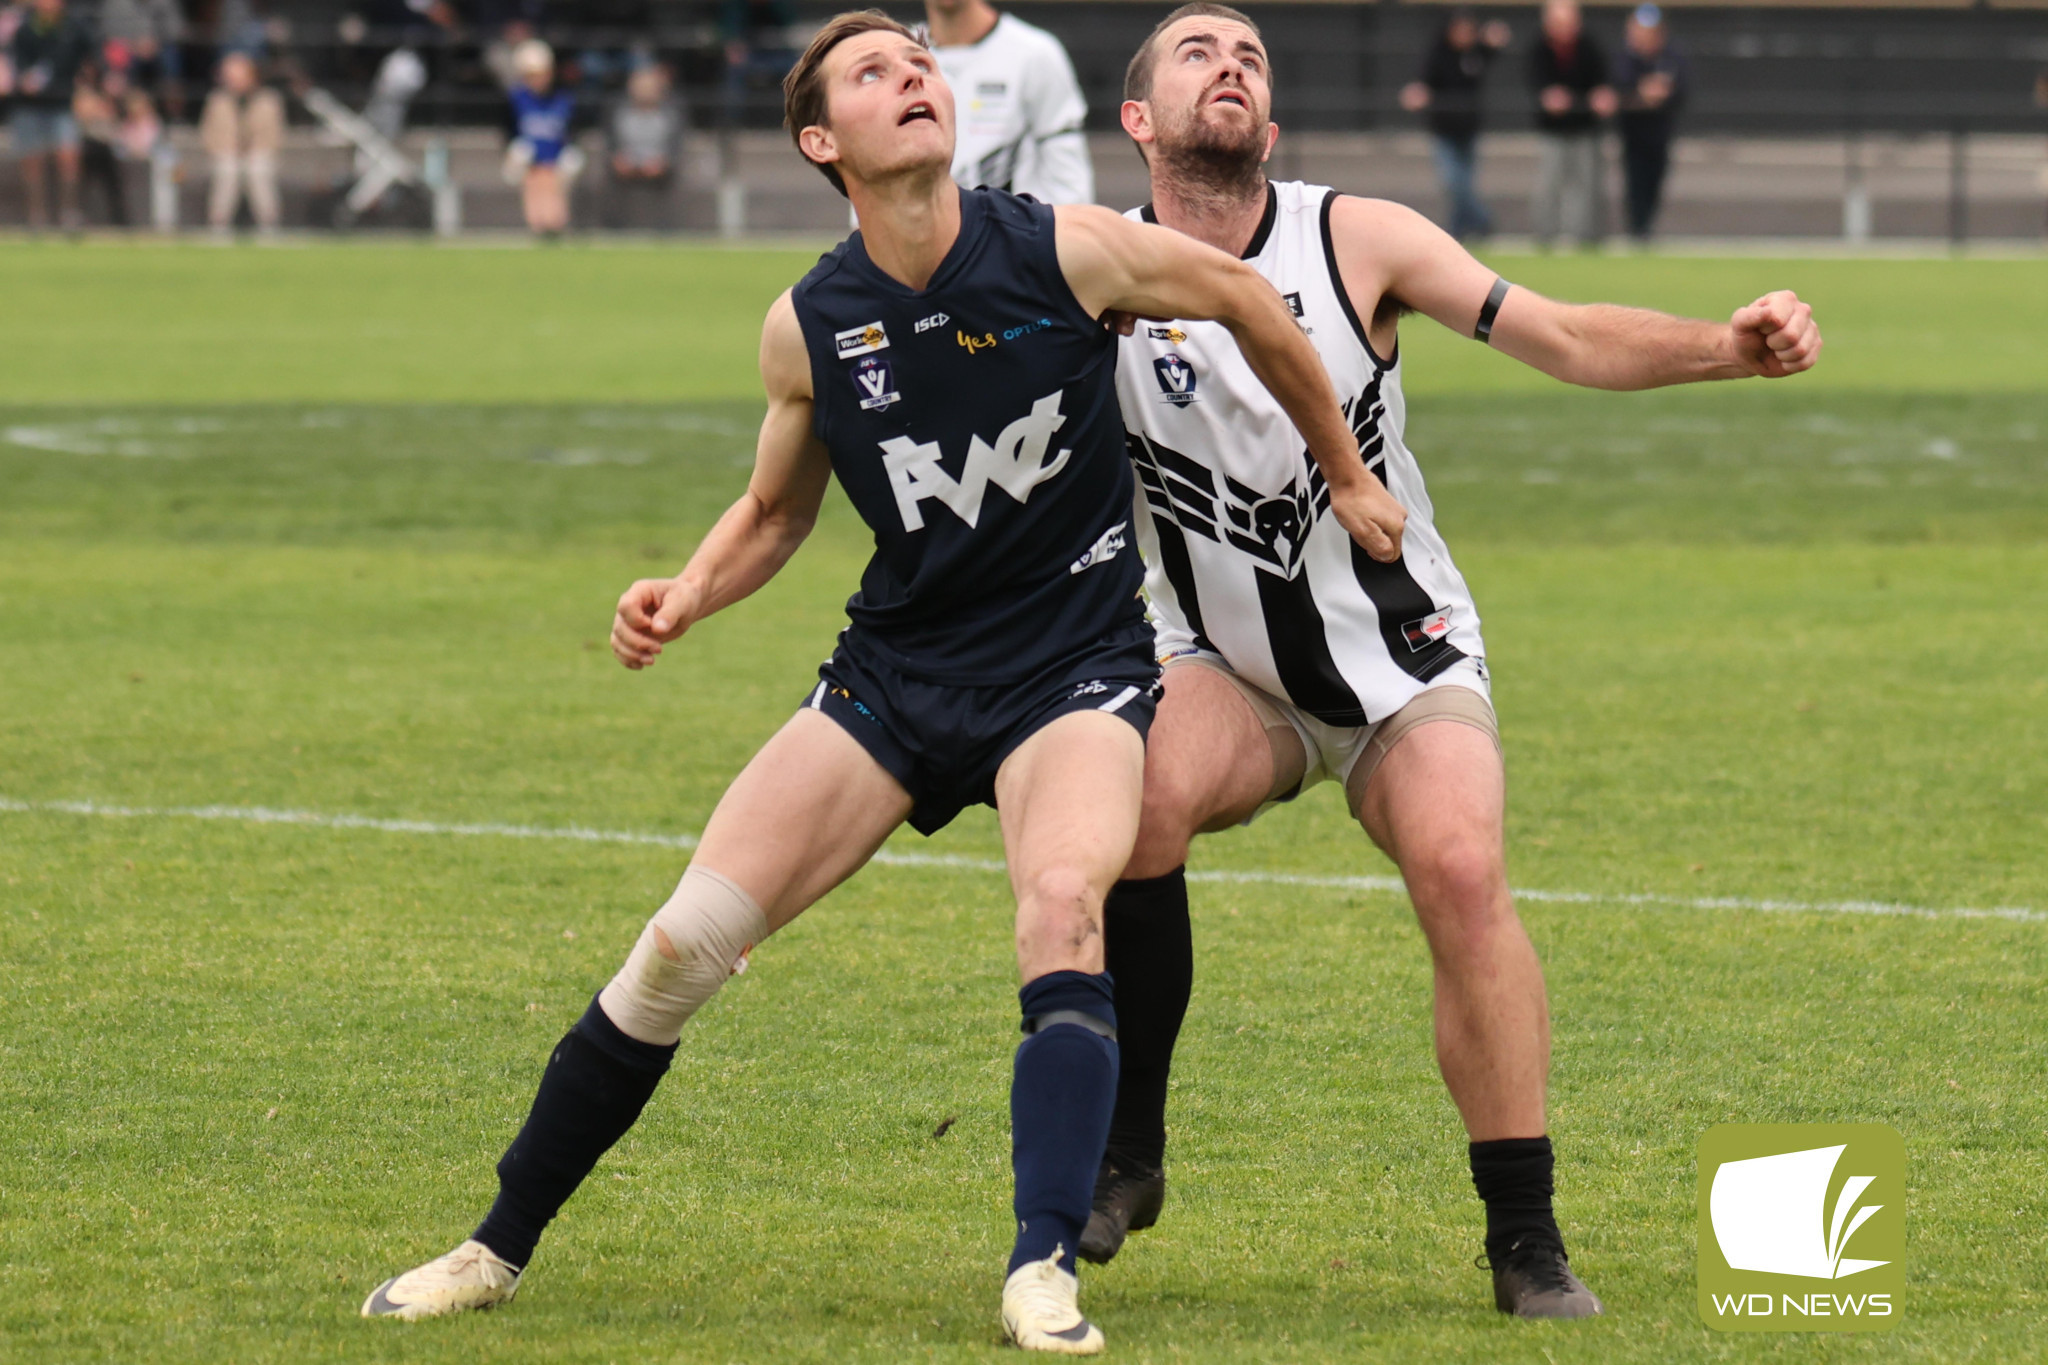 Bye this weekend for Magpies - feature photo